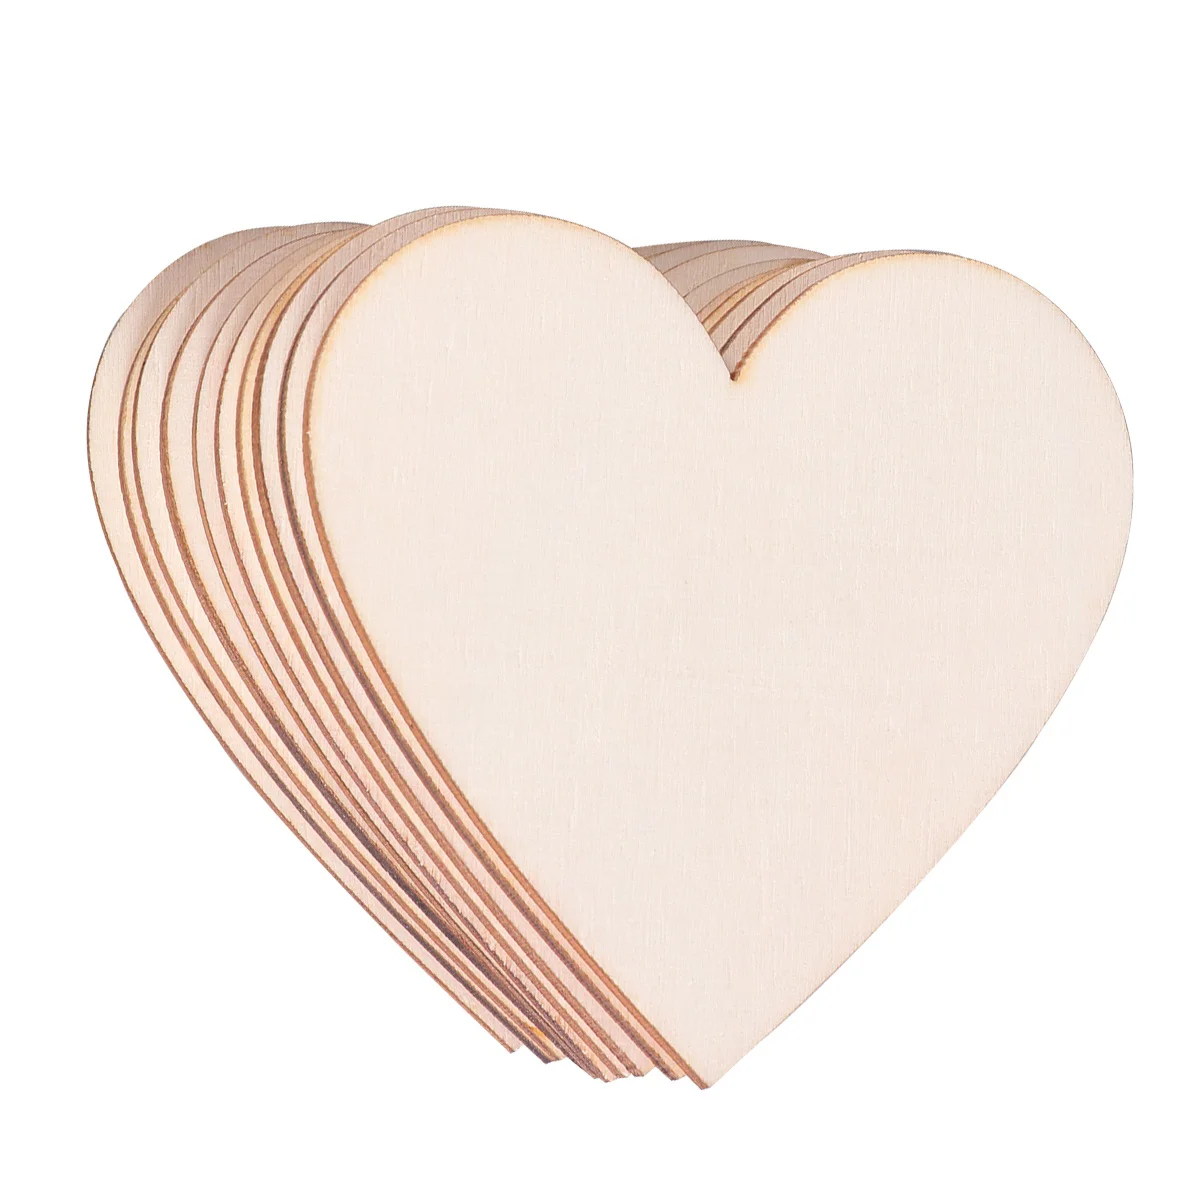 

Heart Wood Slices Wooden Shaped Blank Chips Natural Decoration Chip Love Unfinished Ornaments Diy Embellishments Hearts Cutouts